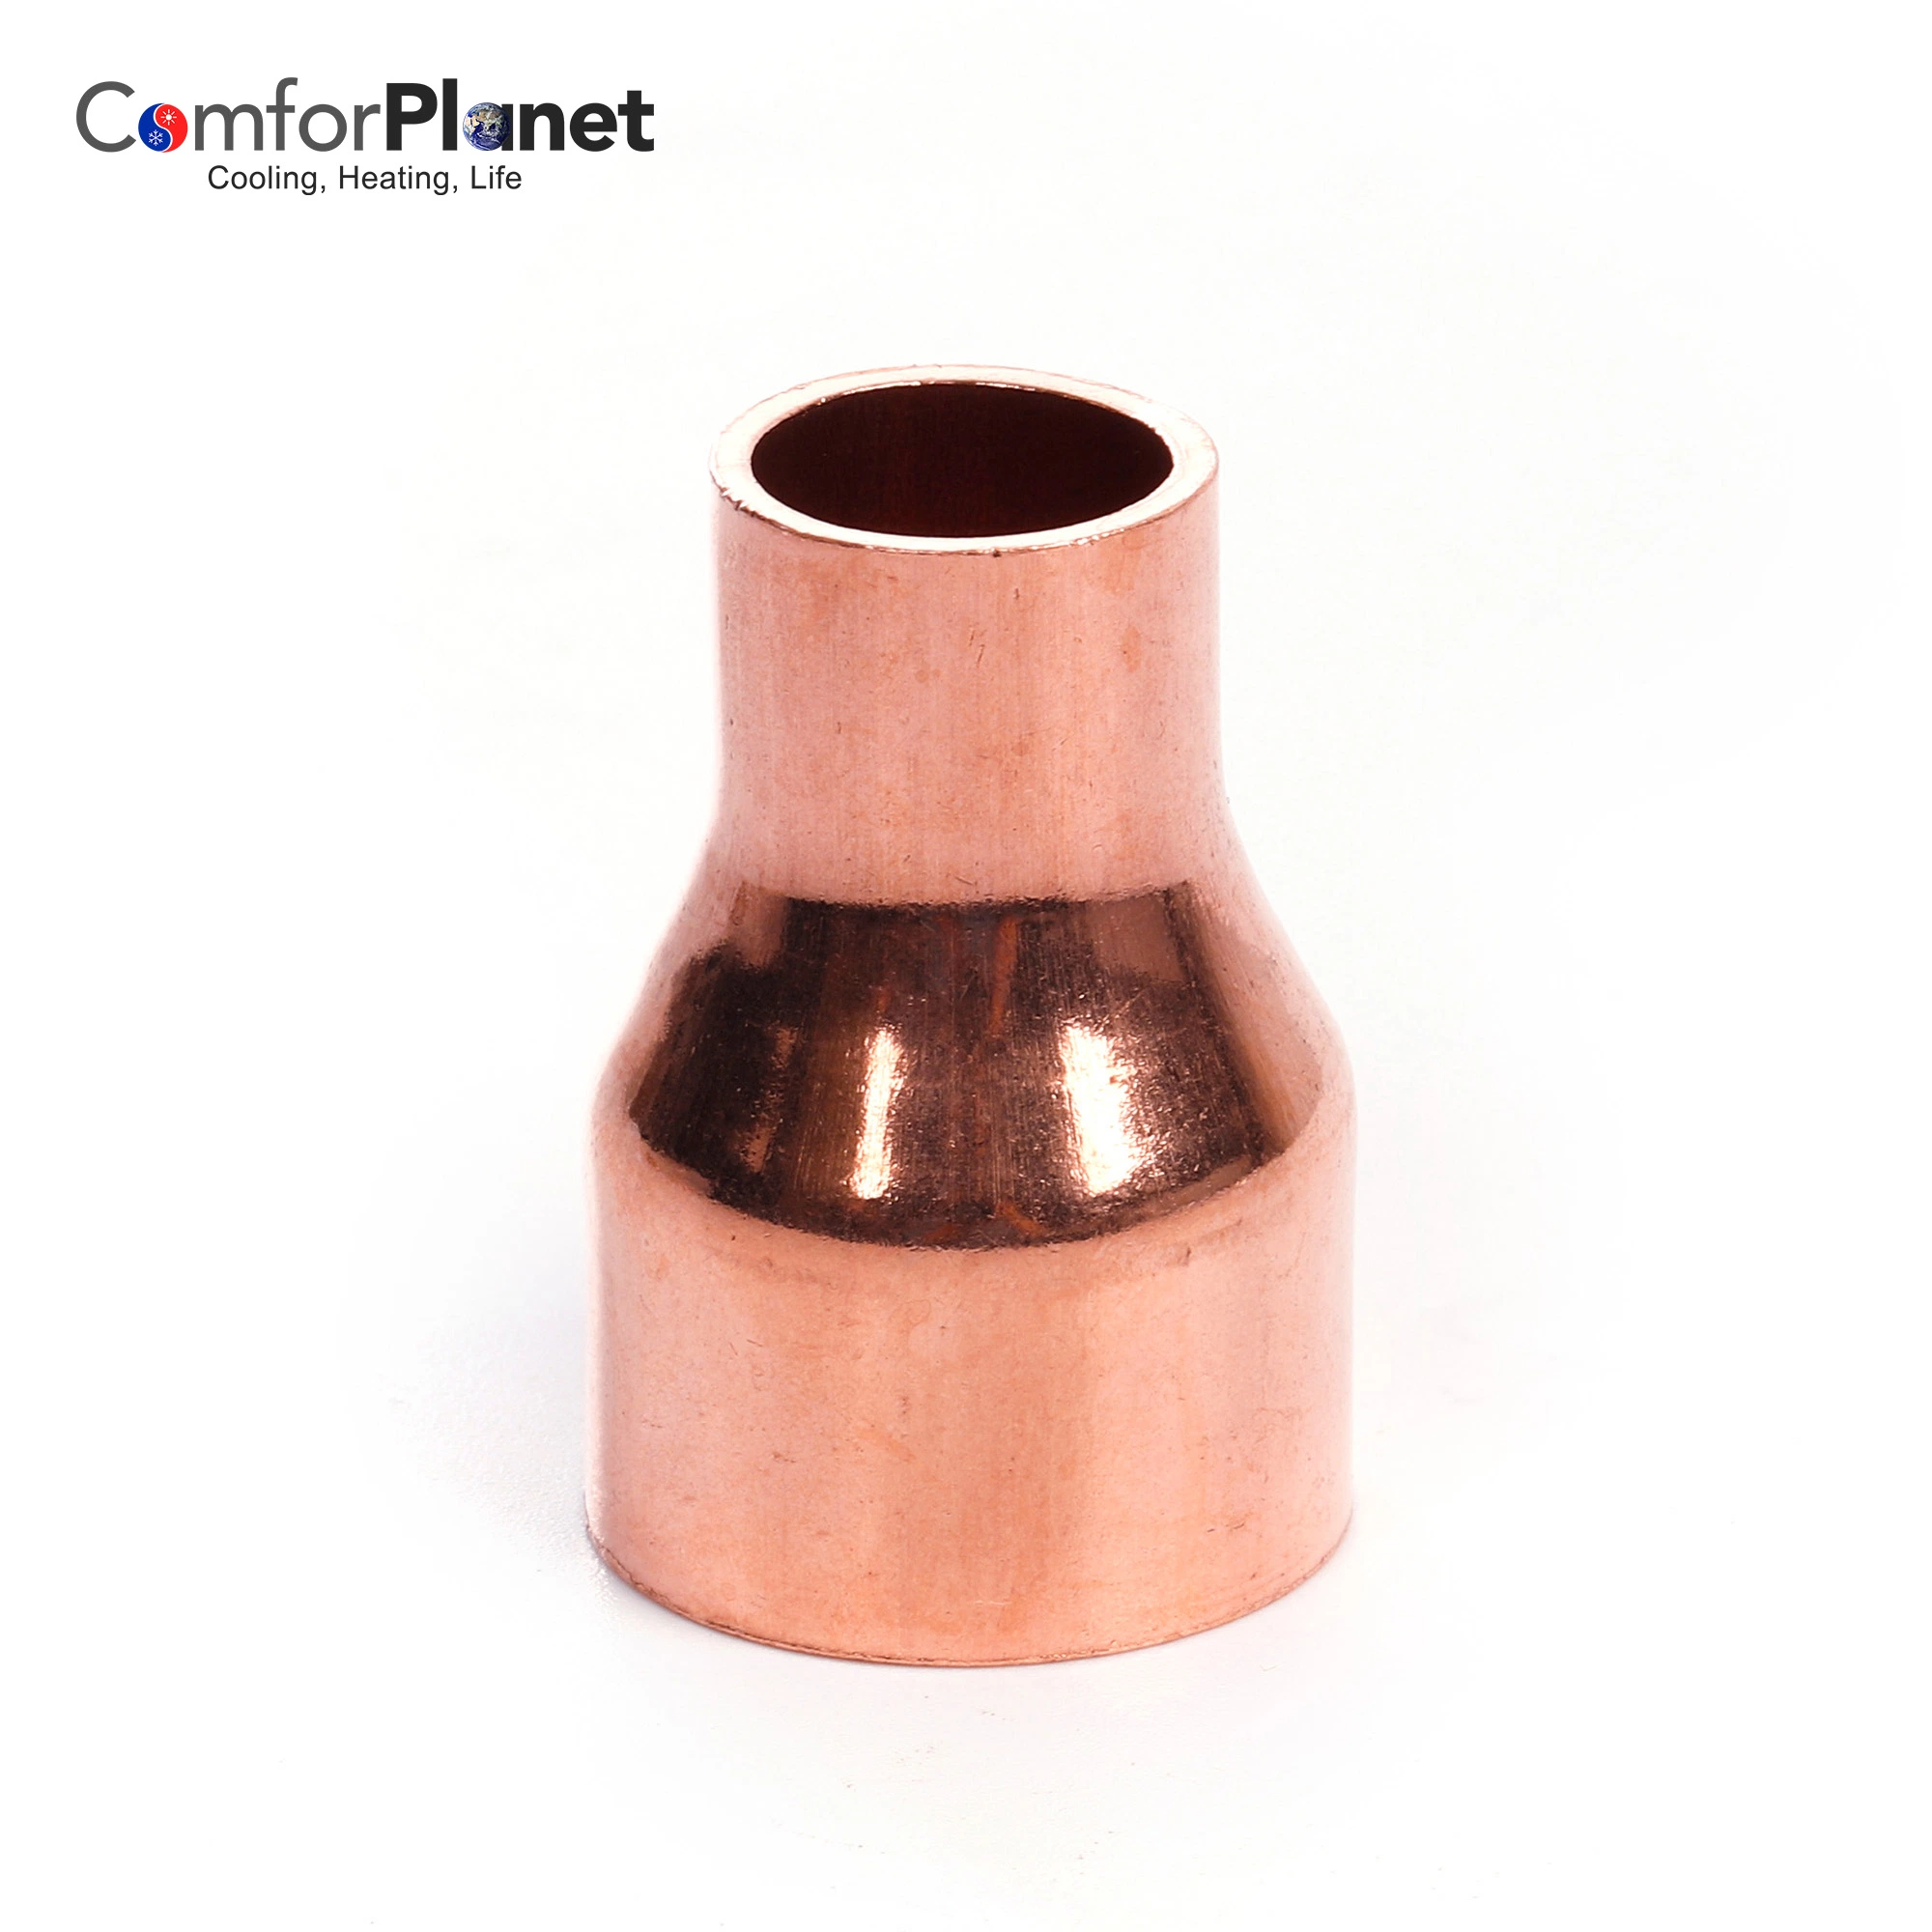 Refrigeration Copper Pipe Tube Copper Fitting Coupling Reducing for Air Conditioning